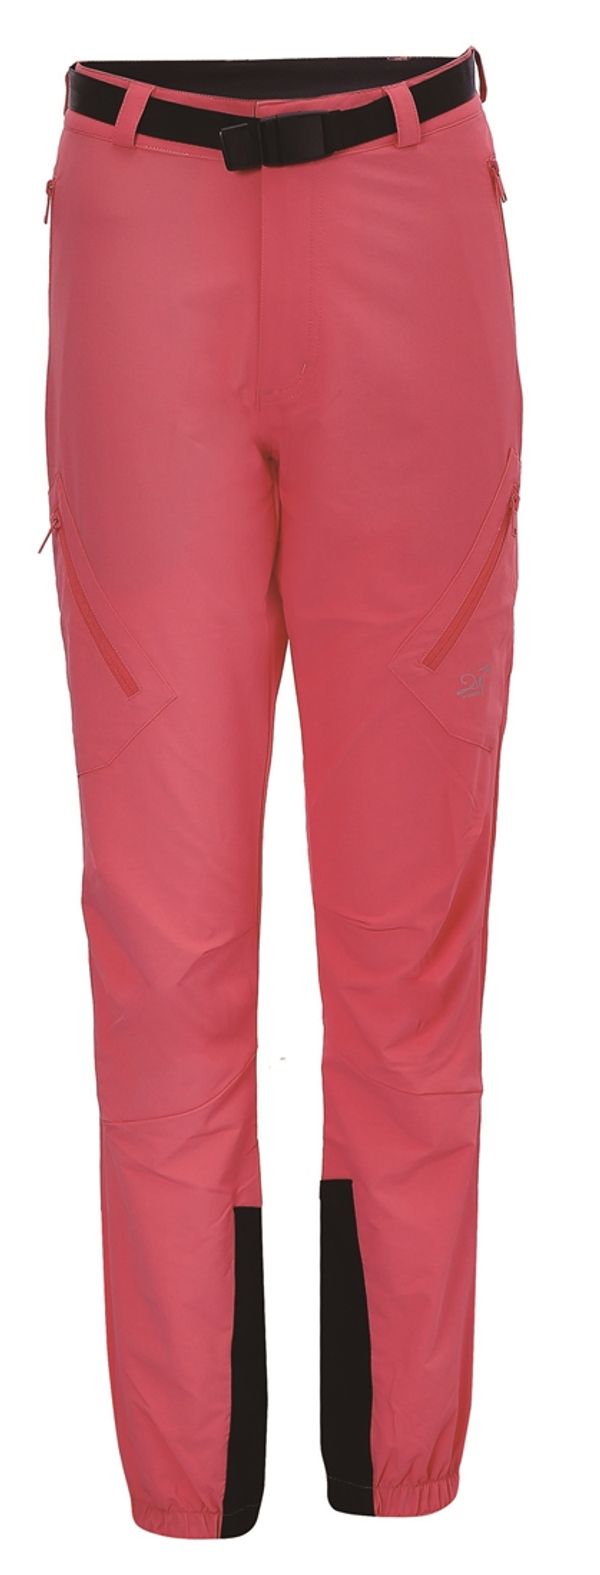 2117 TABY - outdoor.trousers for women - pink